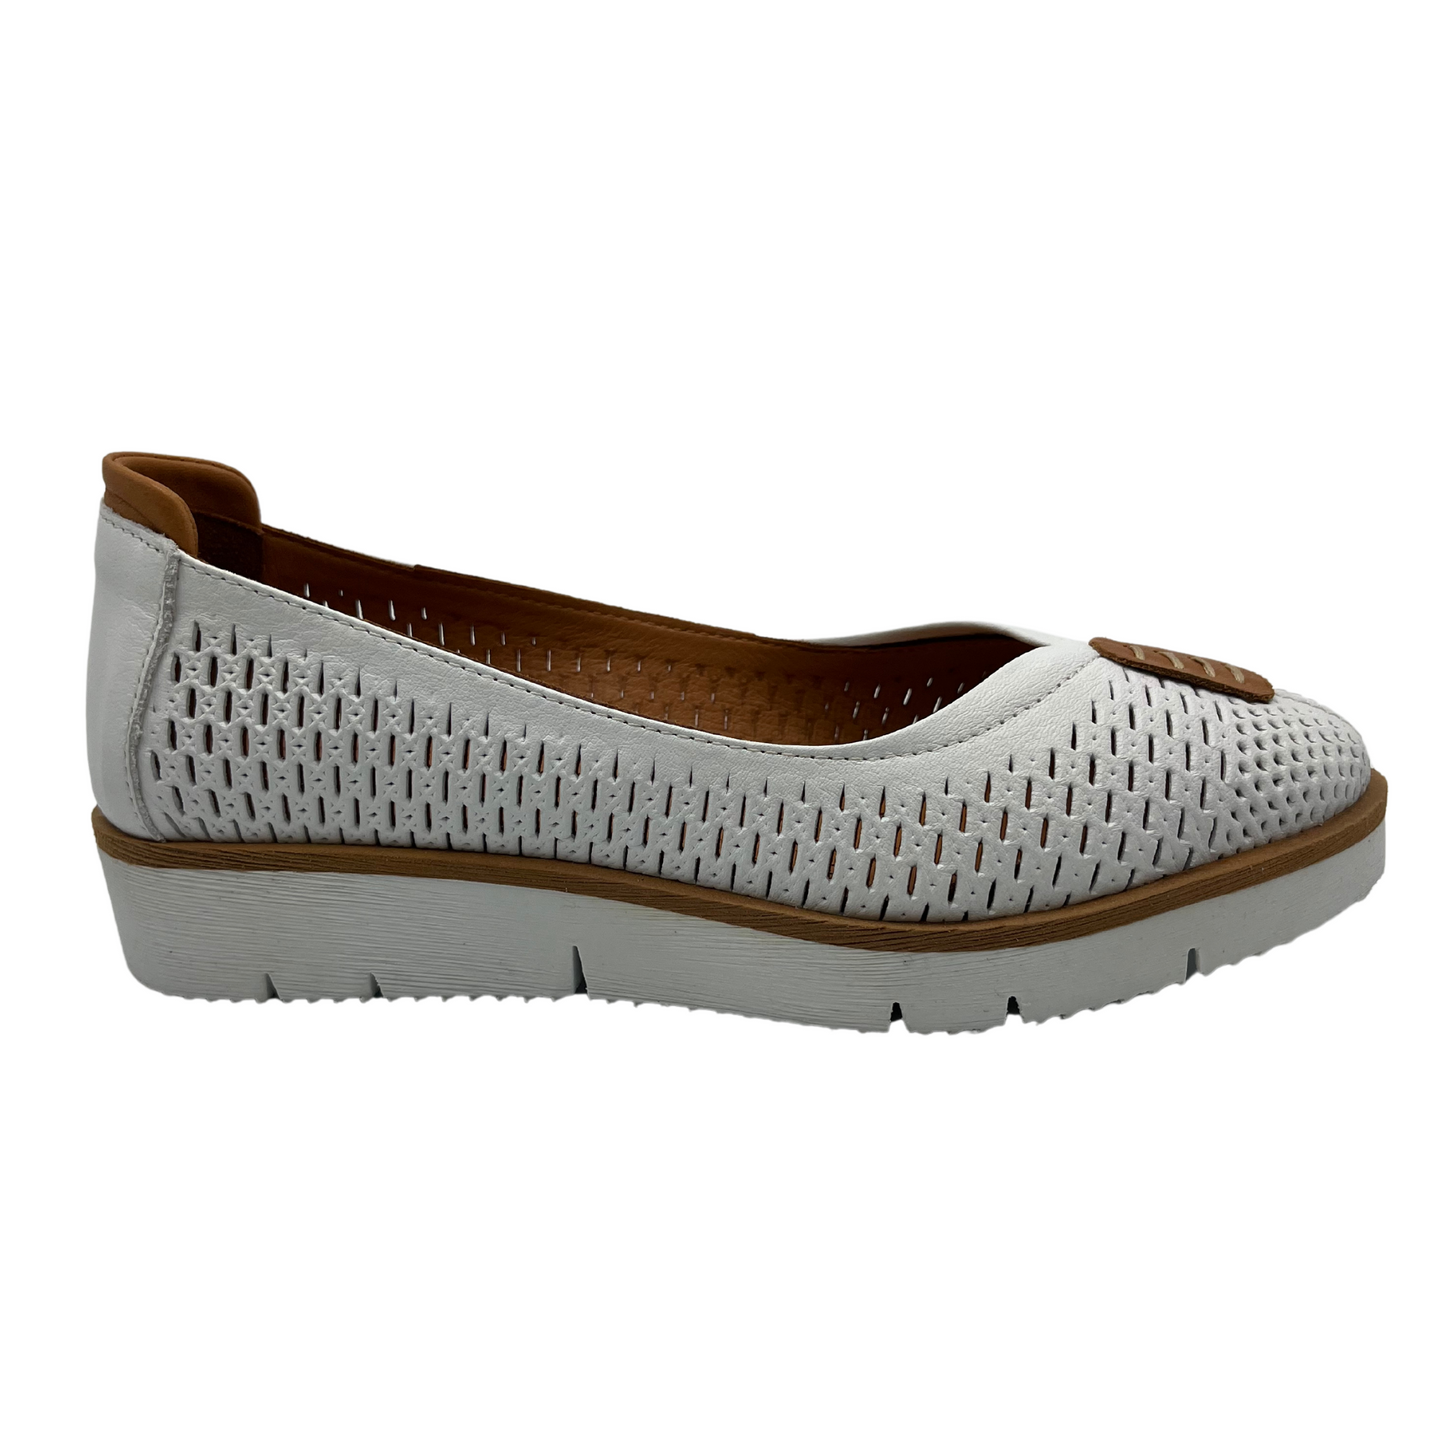 Right facing view of white perforated leather flat with thick outsole and leather lining